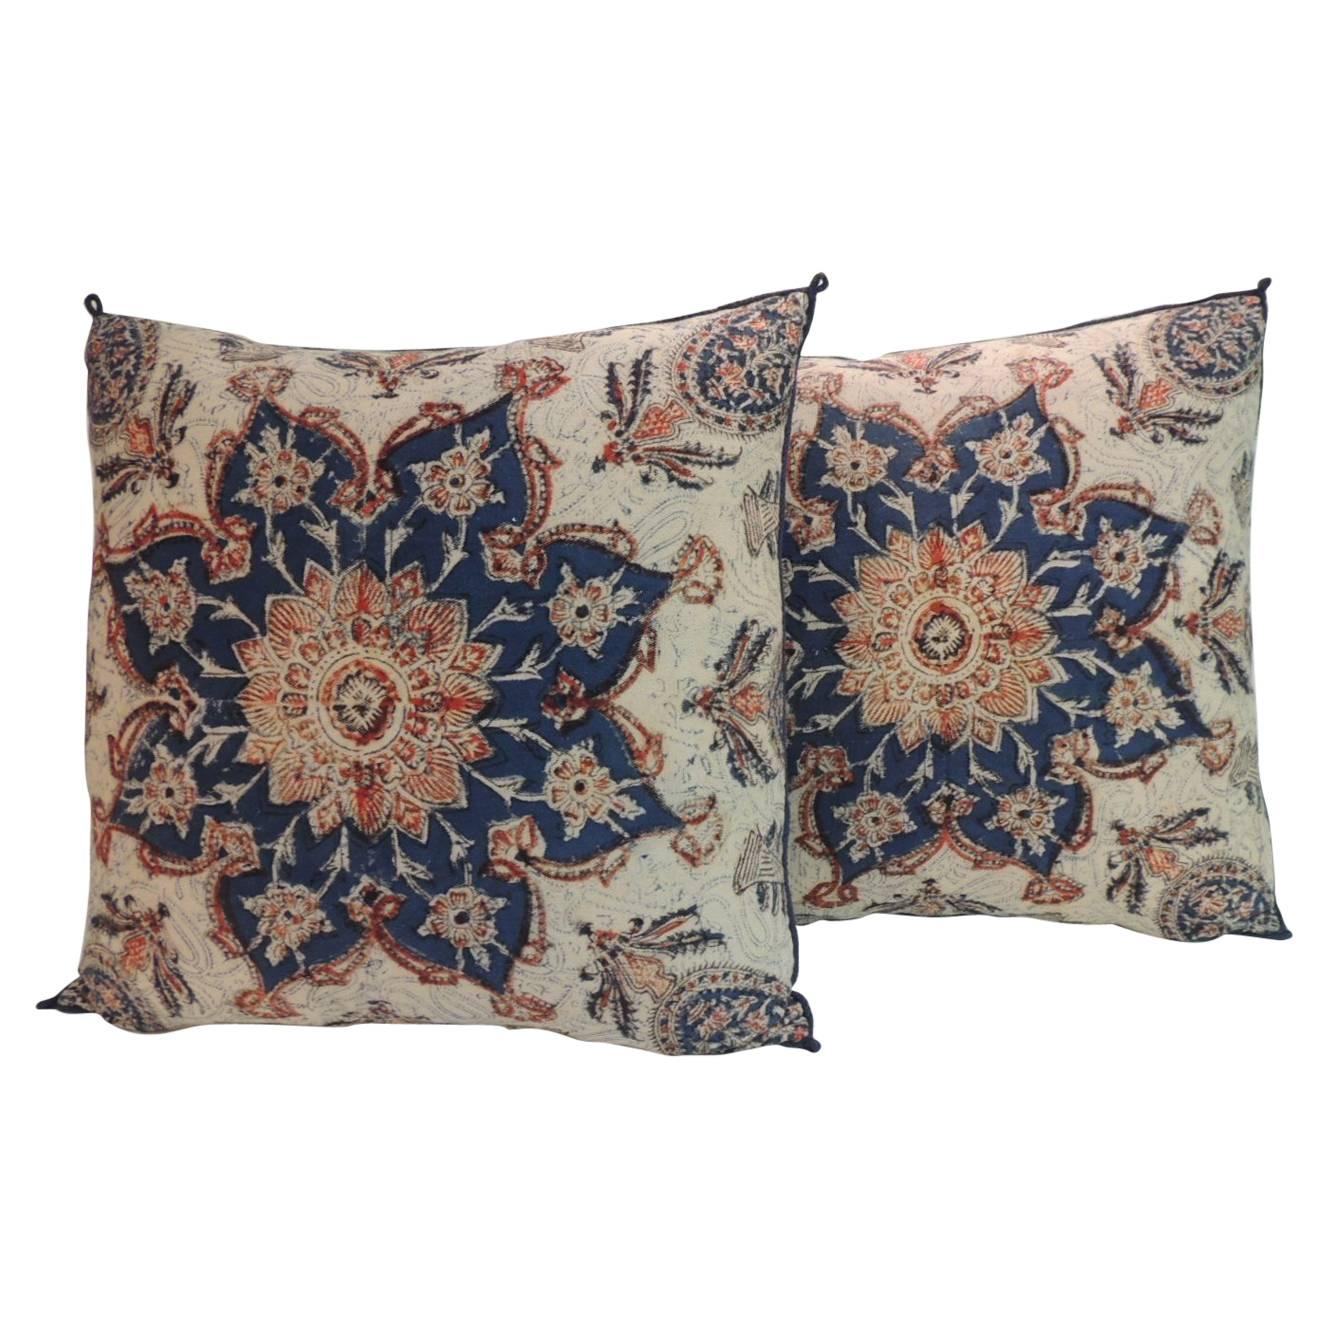 Pair of 19th Century Indian Hand-Blocked Floral Decorative Pillows